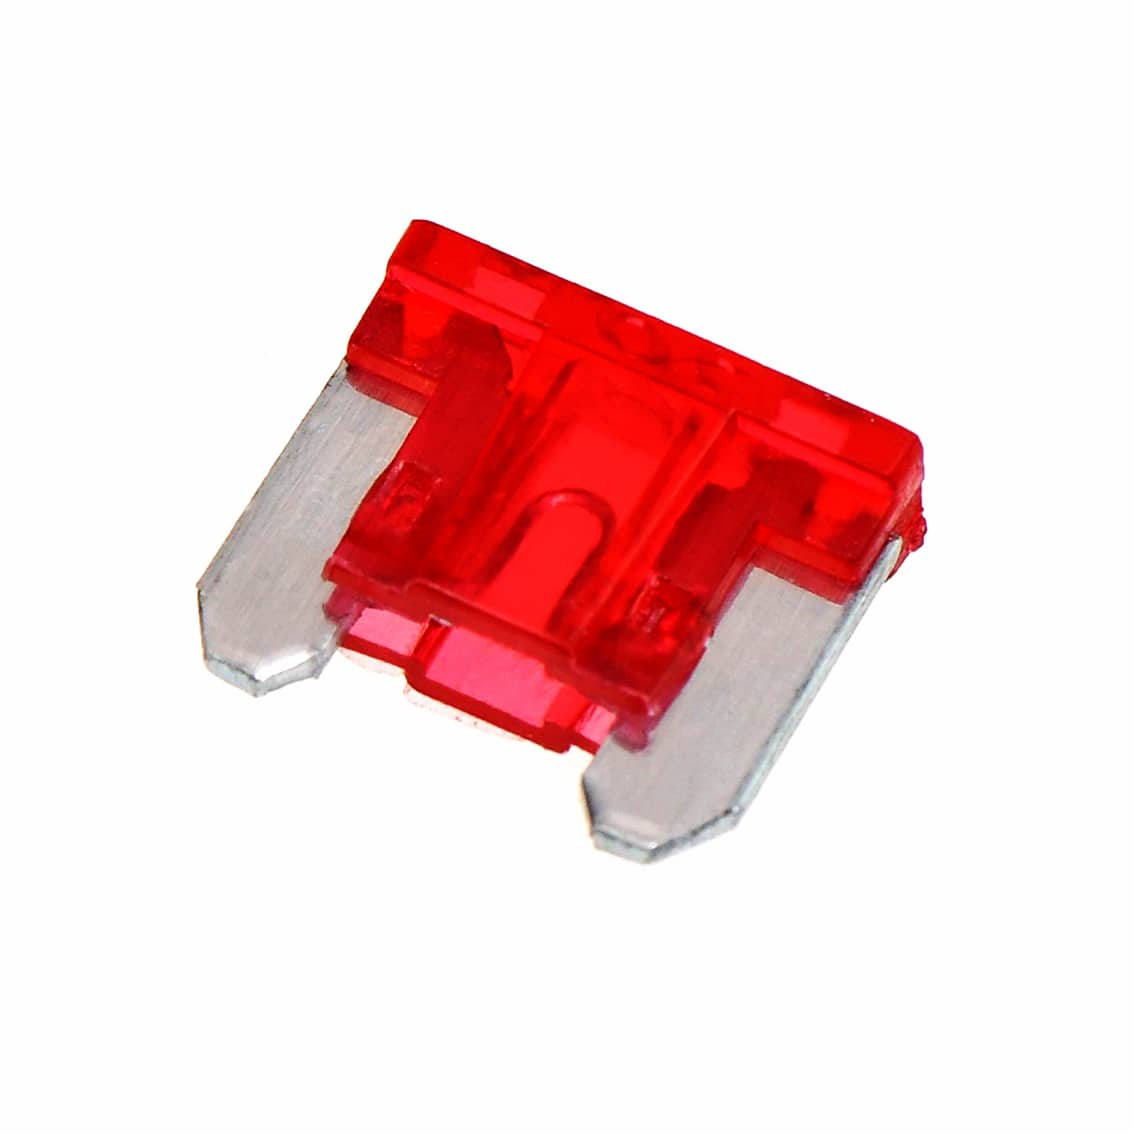 15A Small ATU Blade Fuse Pack of 15 